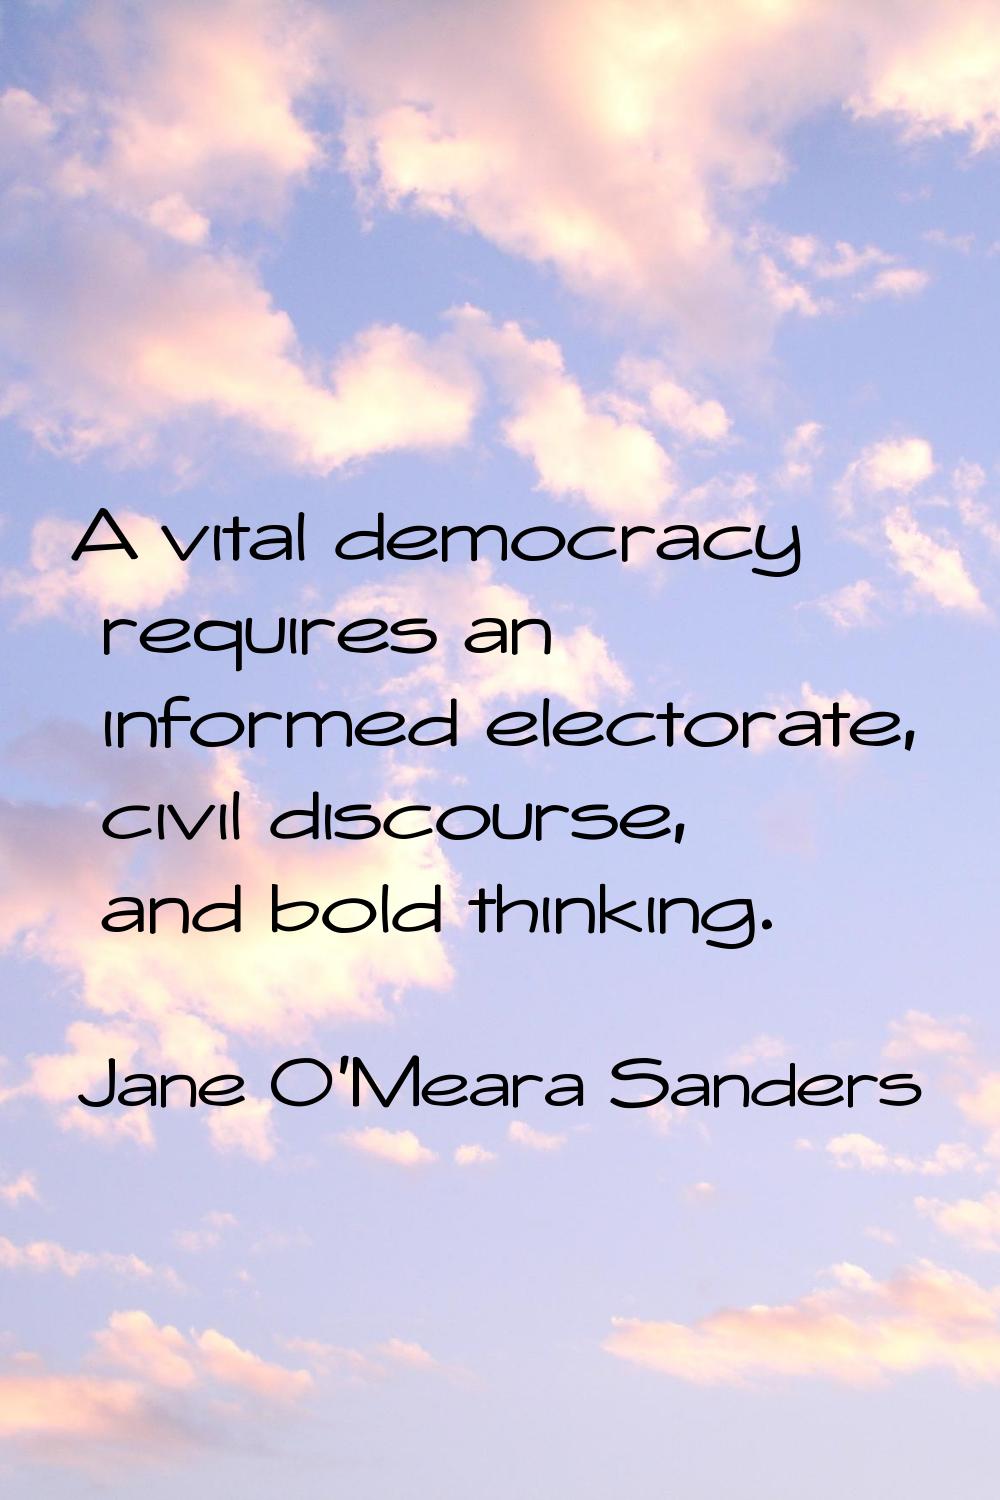 A vital democracy requires an informed electorate, civil discourse, and bold thinking.